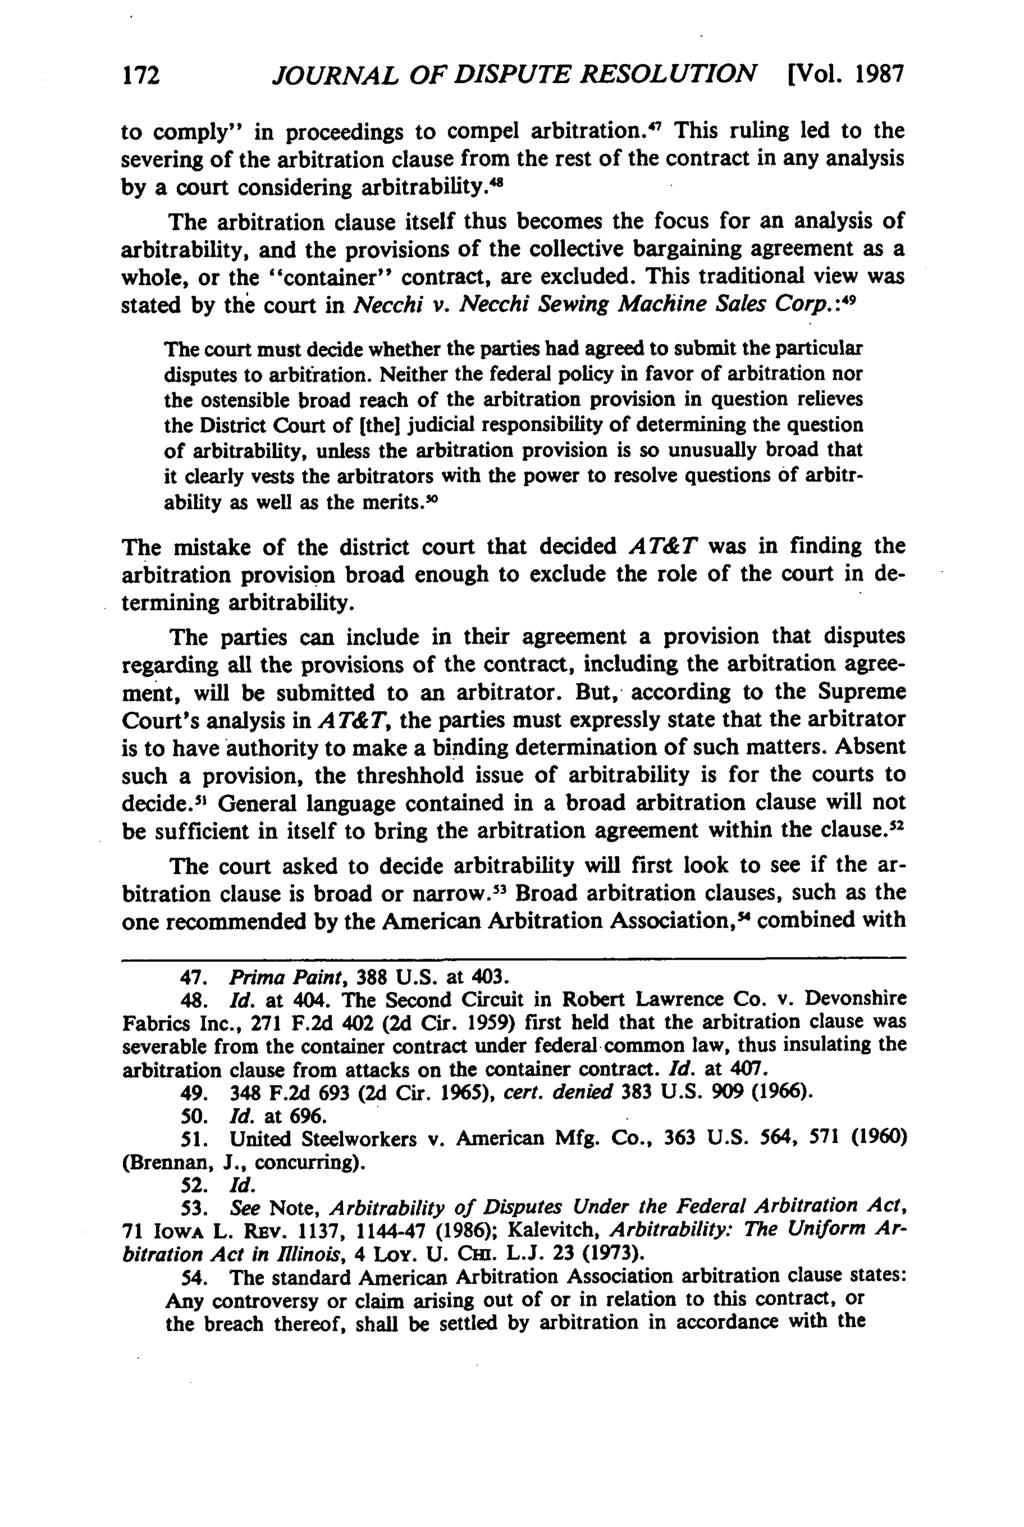 Journal of Dispute Resolution, Vol. 1987, Iss. [1987], Art. 13 172 JOURNAL OF DISPUTE RESOLUTION [Vol. 1987 to comply" in proceedings to compel arbitration.